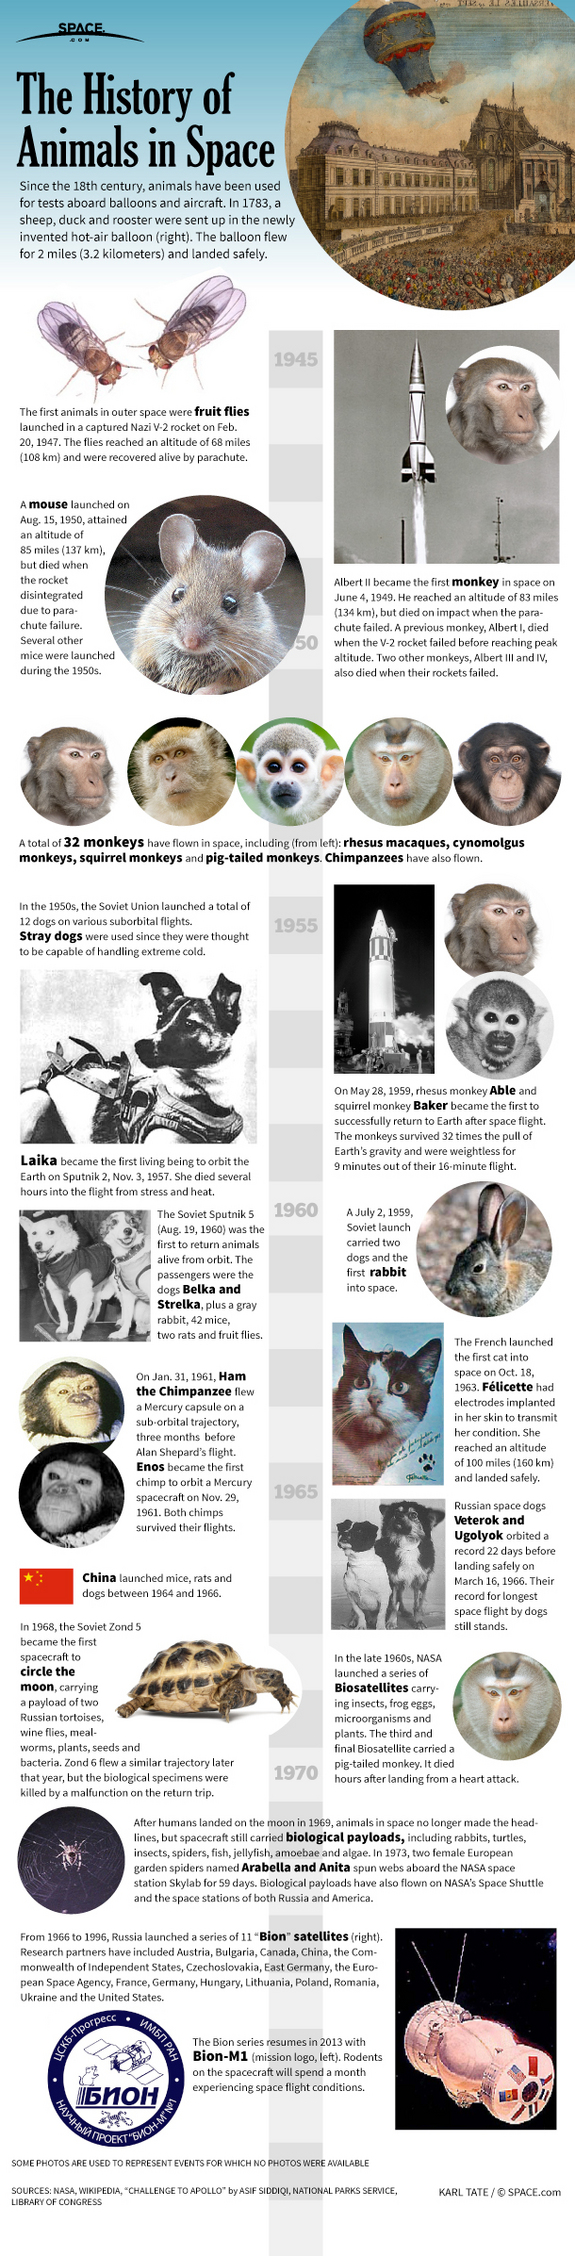 Find out about the history of animals used for testing in space flight, in this SPACE.com infographic.